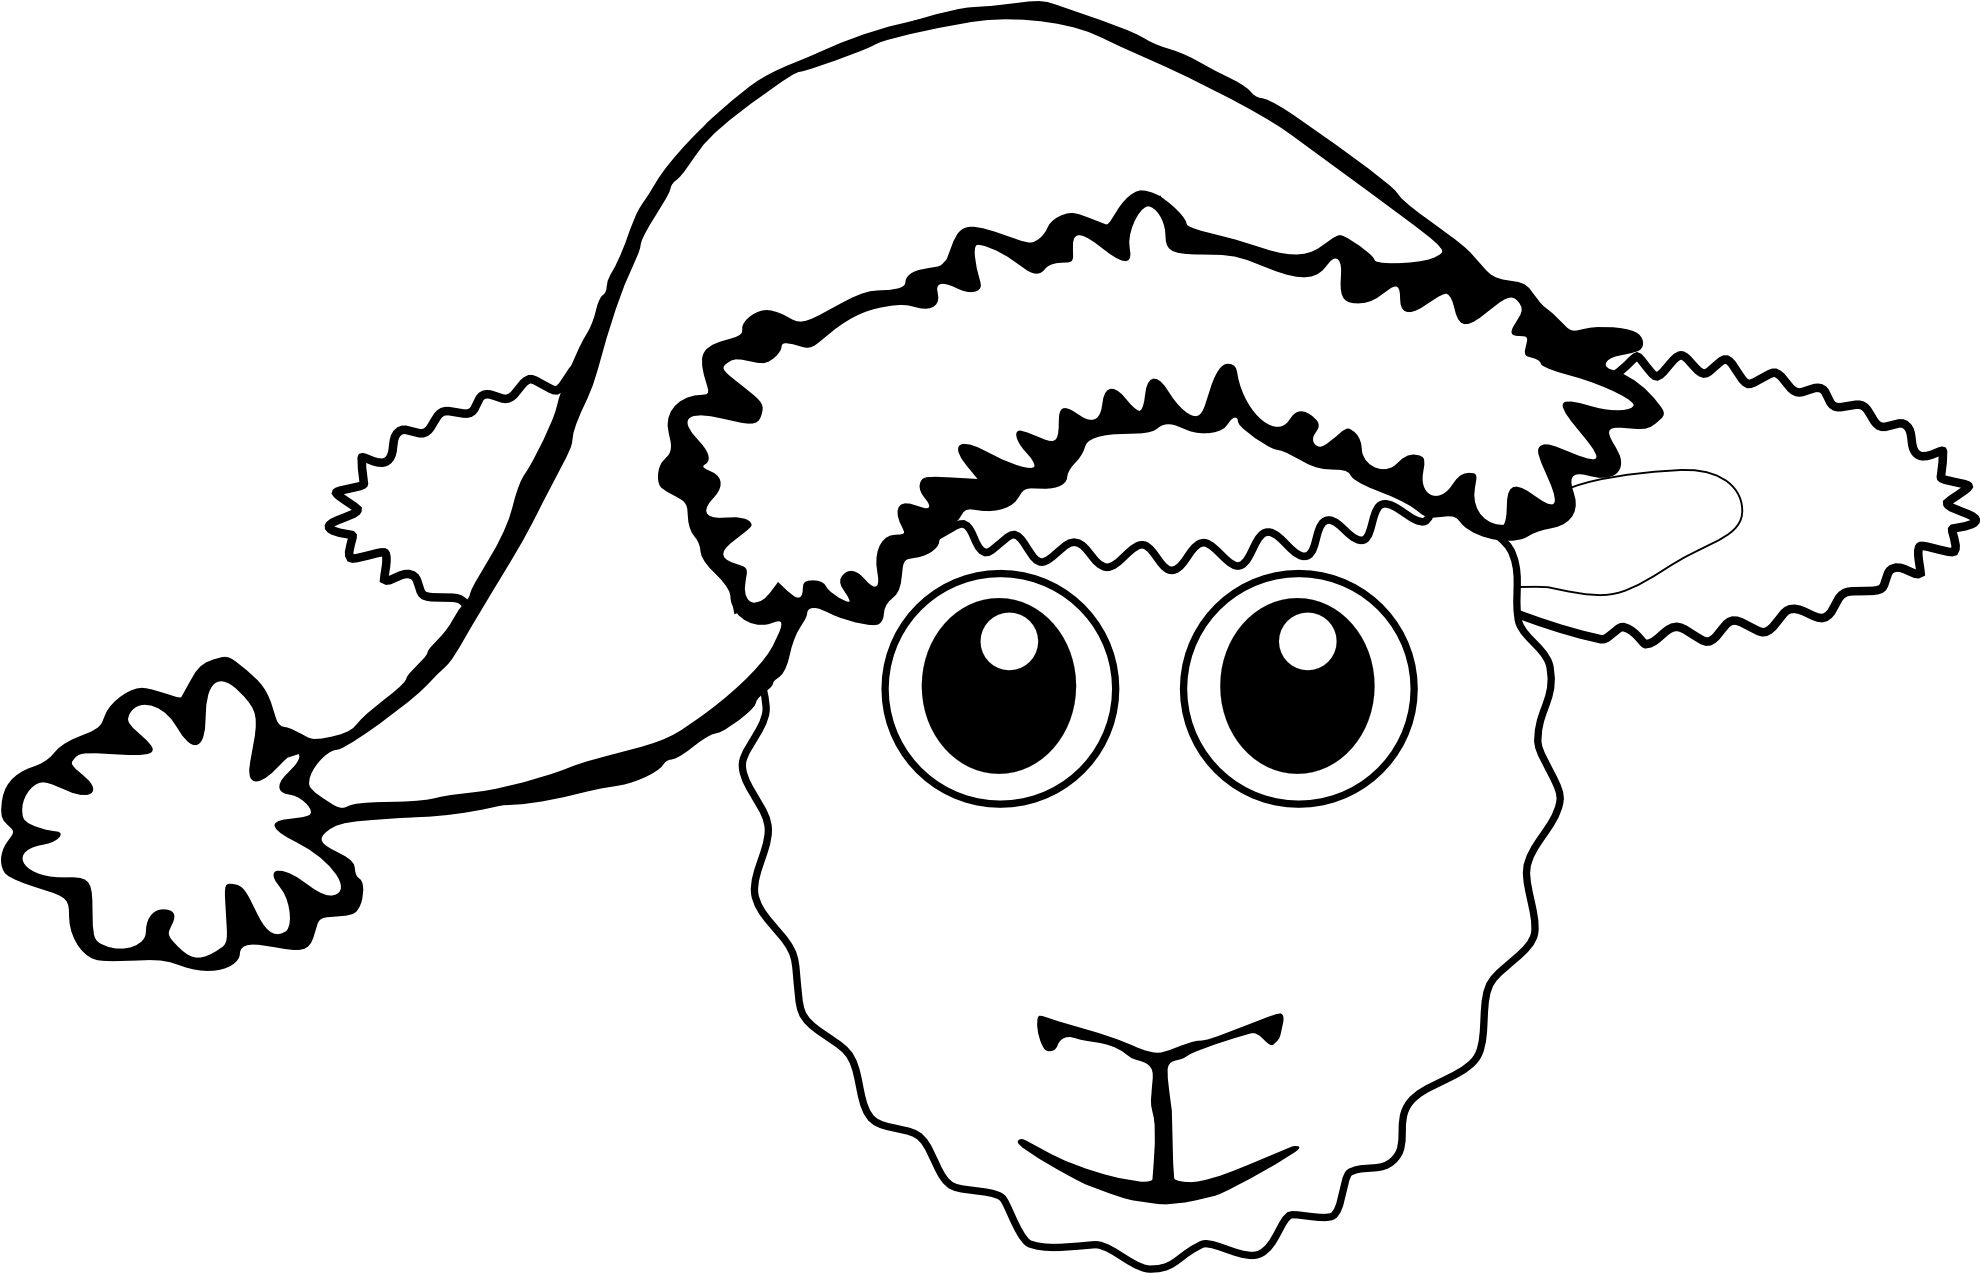 Sheep - Clipart - Black - And - White - Christmas Sheep Coloring Page (1979x1378)